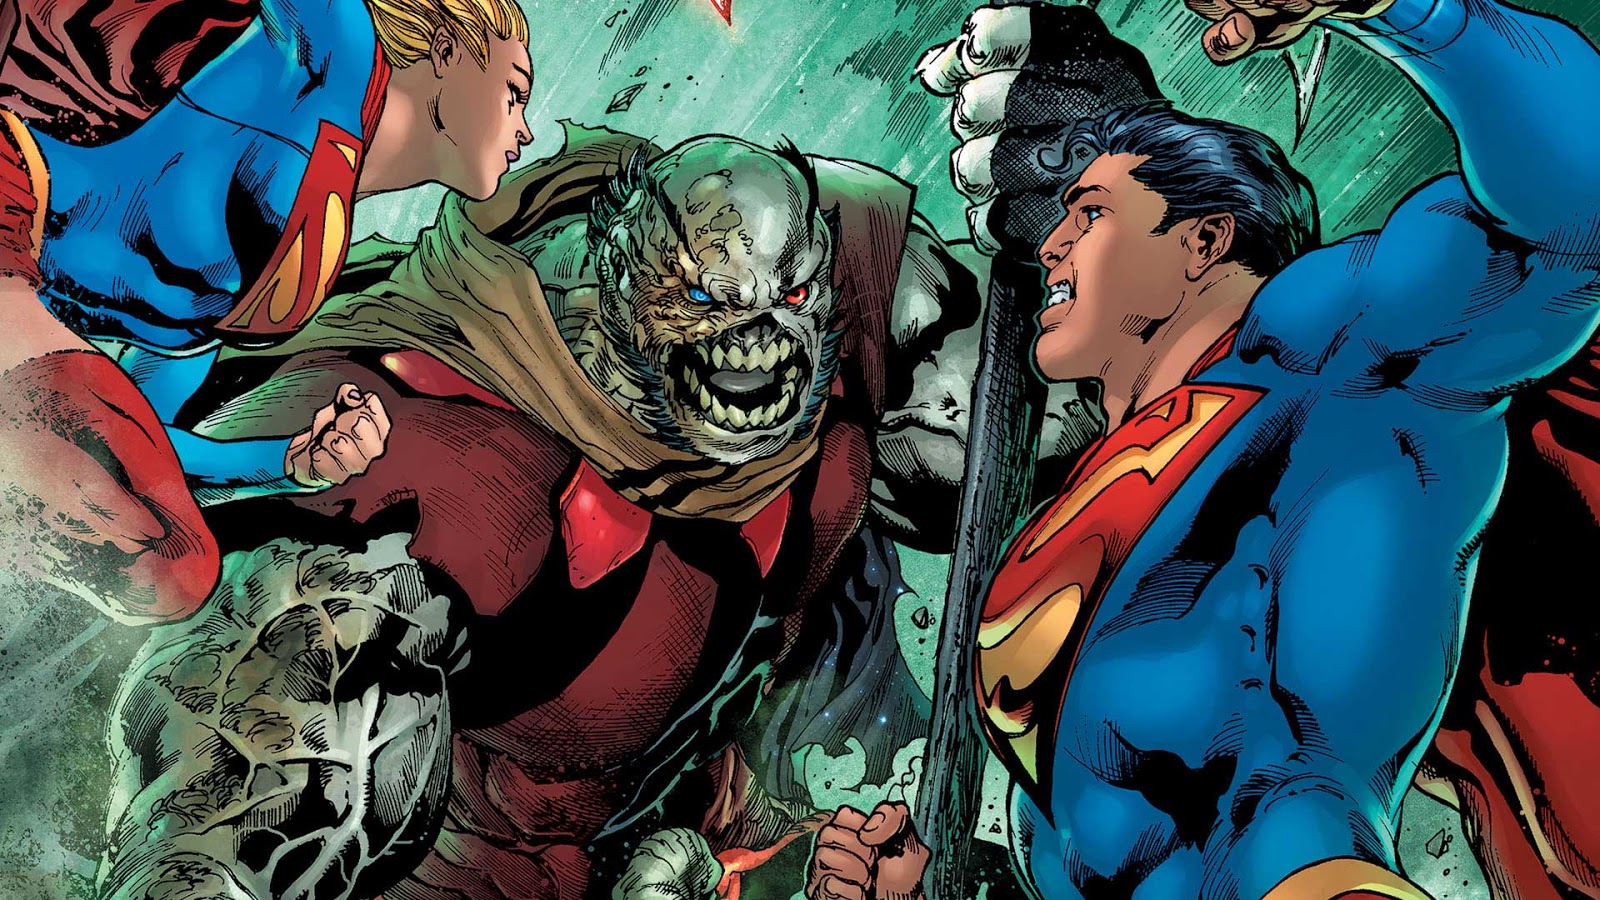 Weird Science DC Comics: The Man of Steel #6 Review and **SPOILERS**